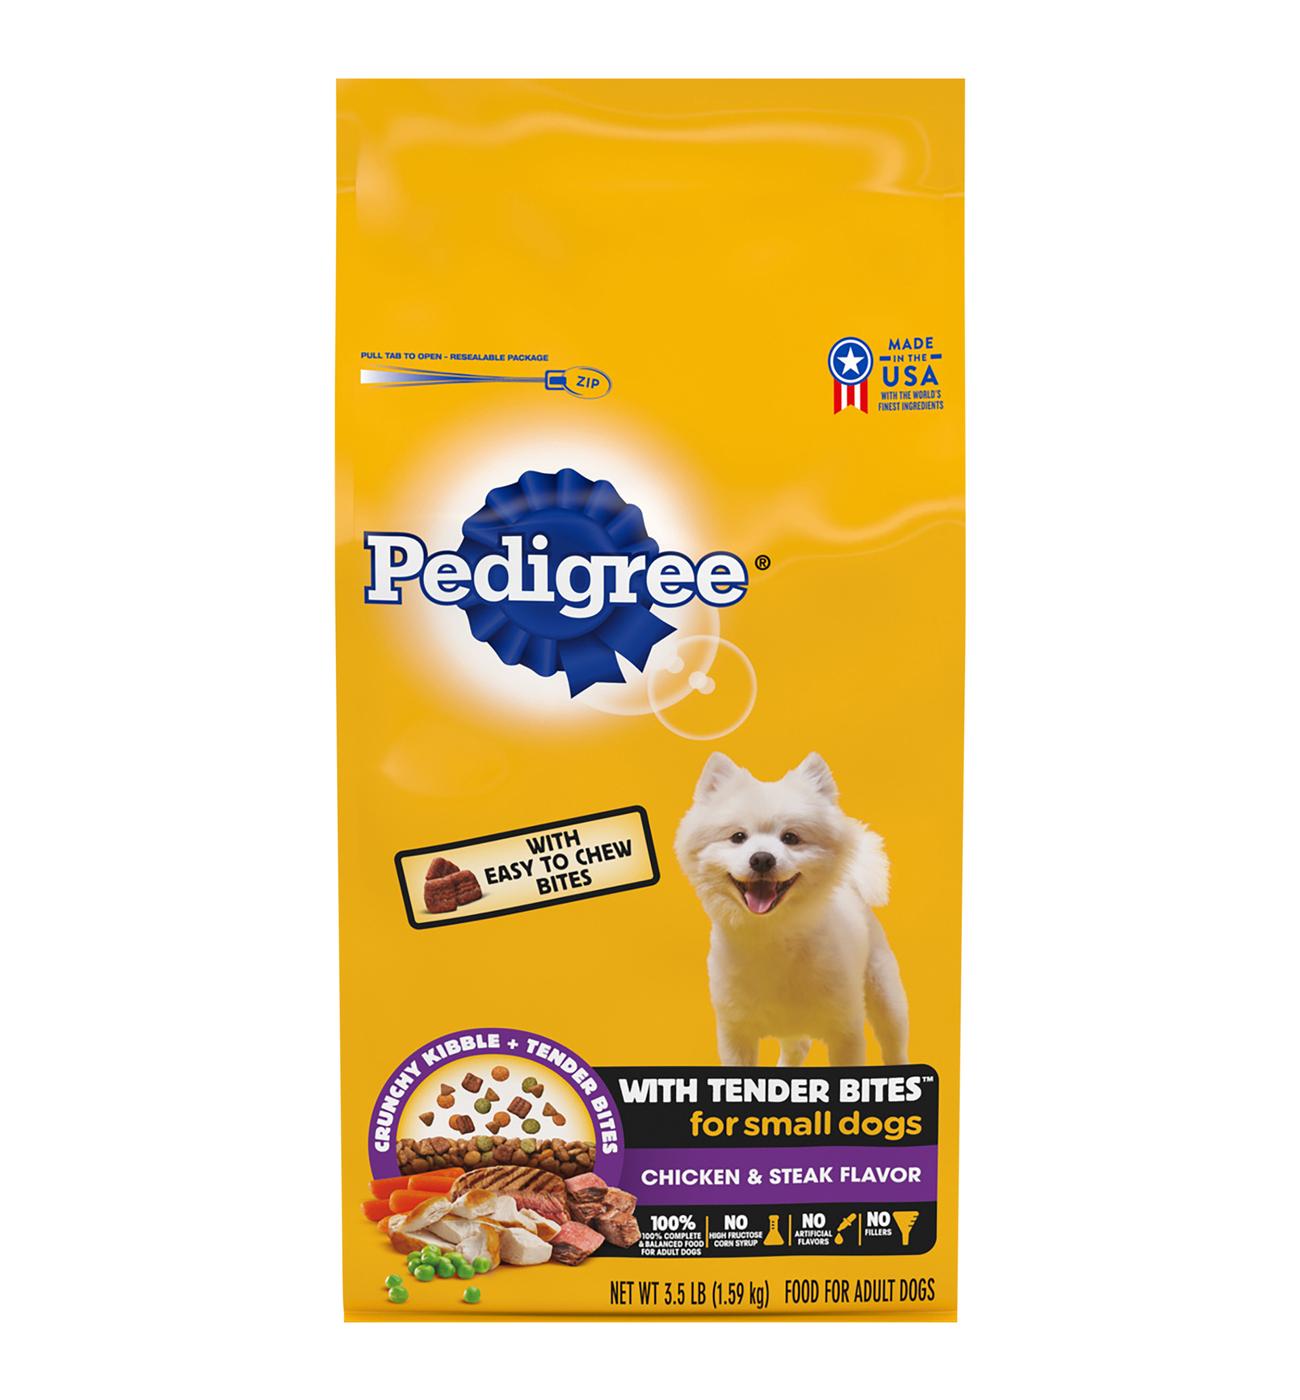 Pedigree Tender Bites for Small Dogs Chicken & Steak Dry Dog Food; image 1 of 2